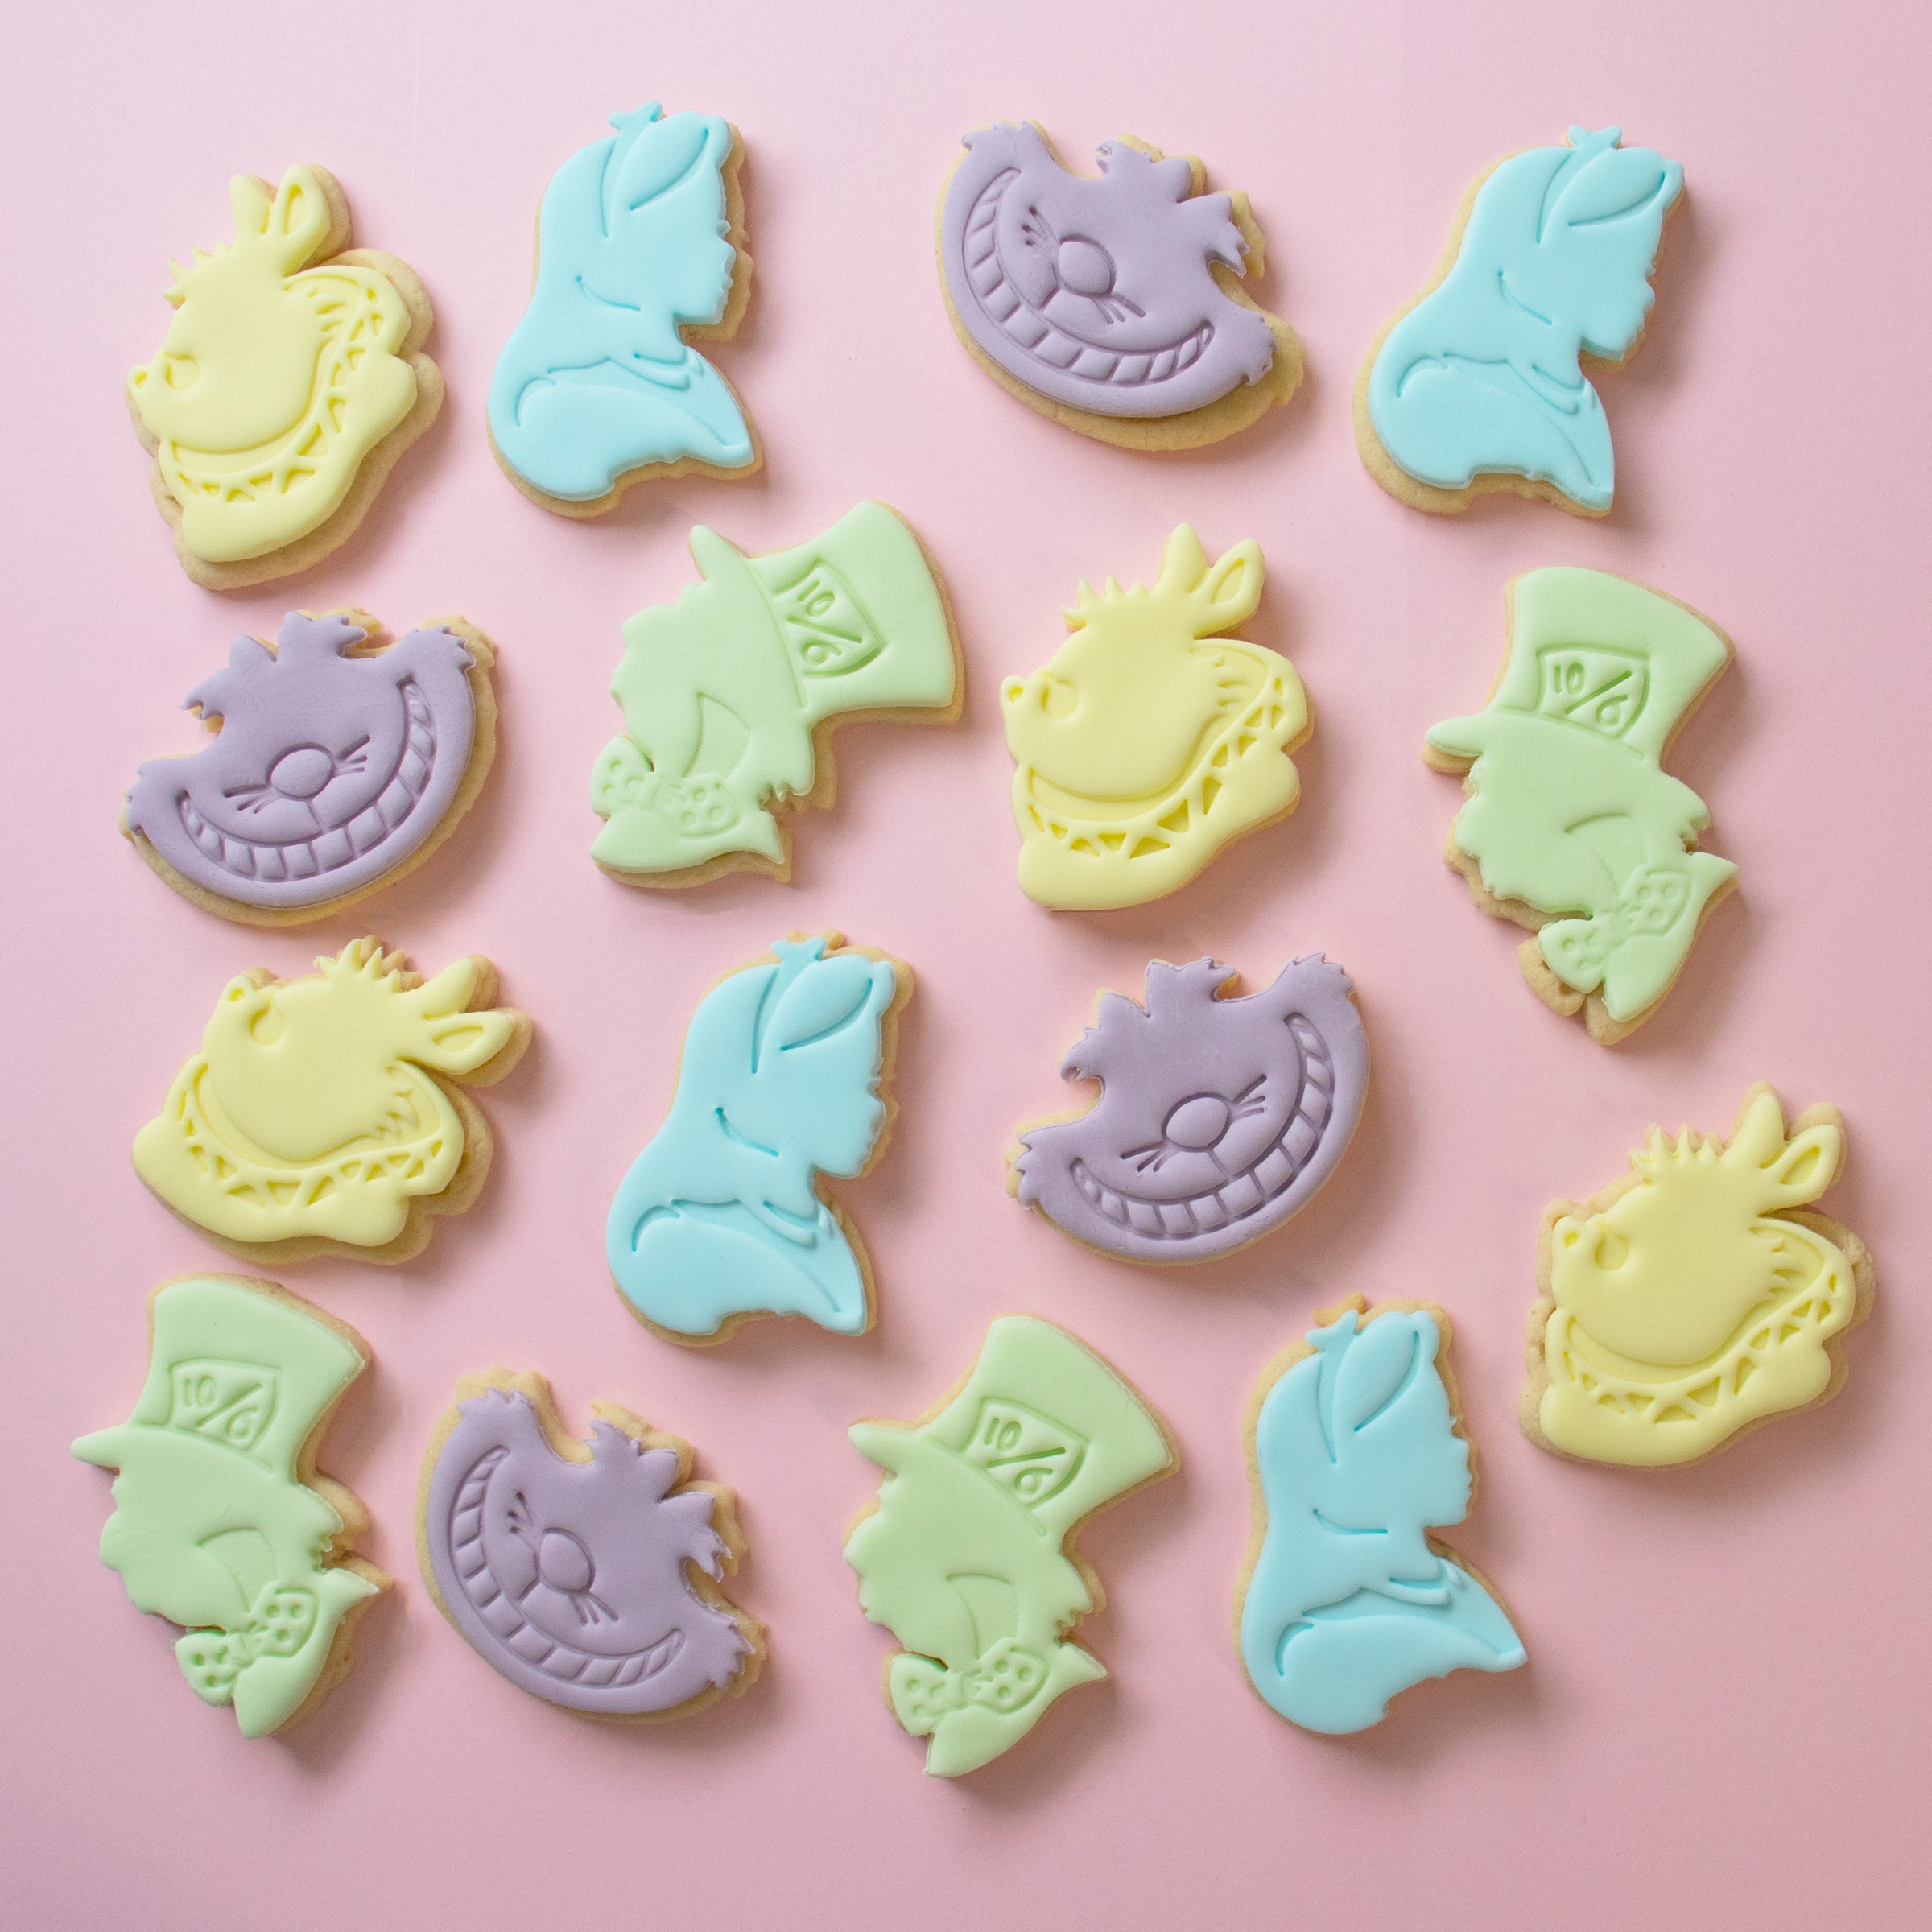 set of 4 alice's adventures in wonderland characters cookies with fondant - alice kingsley, mad hatter, cheshire cat, white rabbit